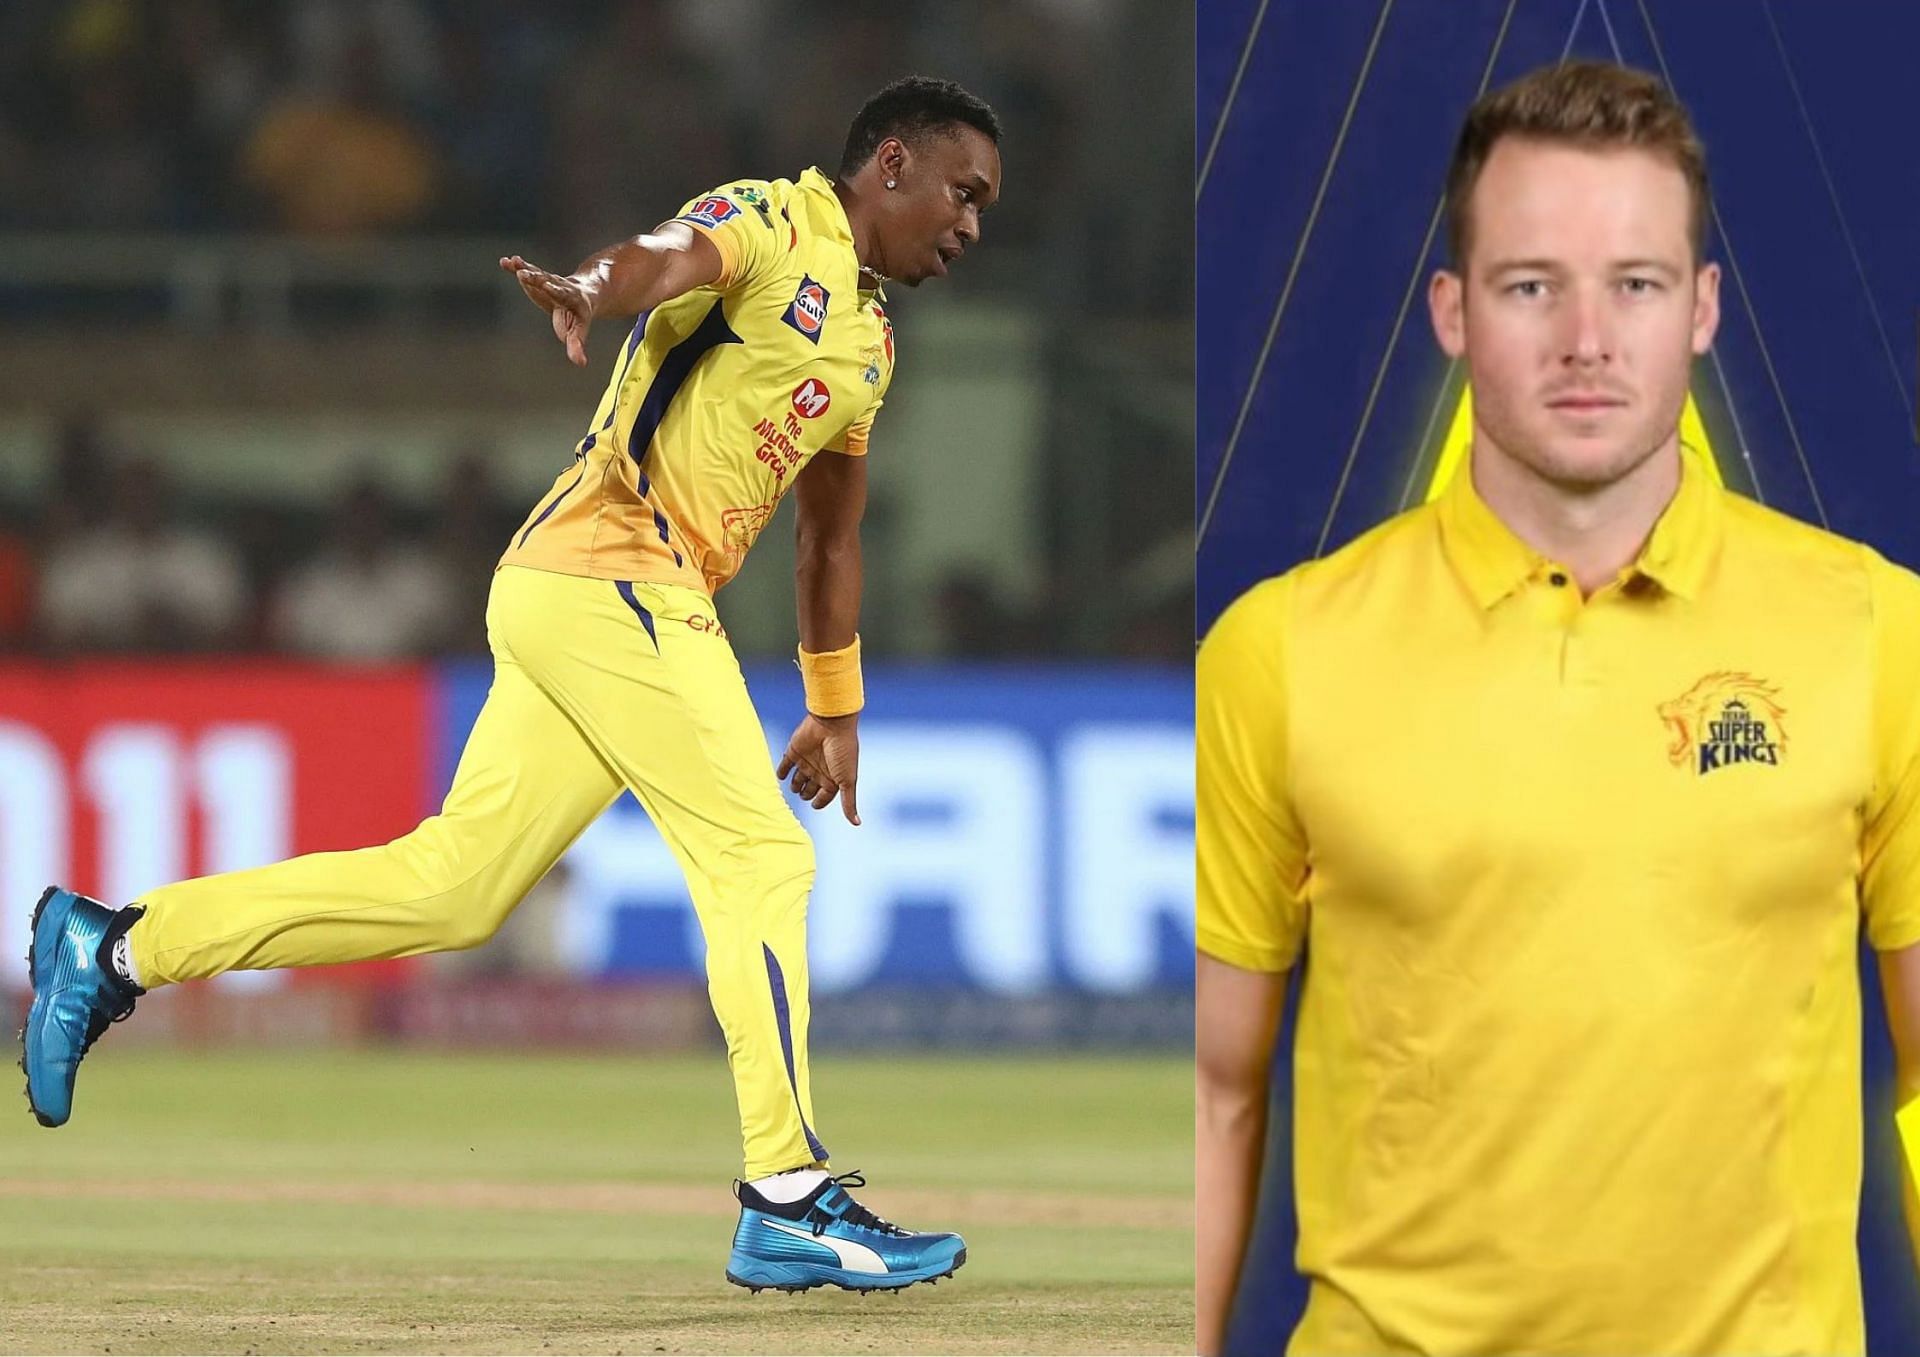 Dwayne Bravo will sport the yellow of the Super Kings again and will have David Miller for company (Picture Credits: Getty Images; Twitter/Texas Super Kings).